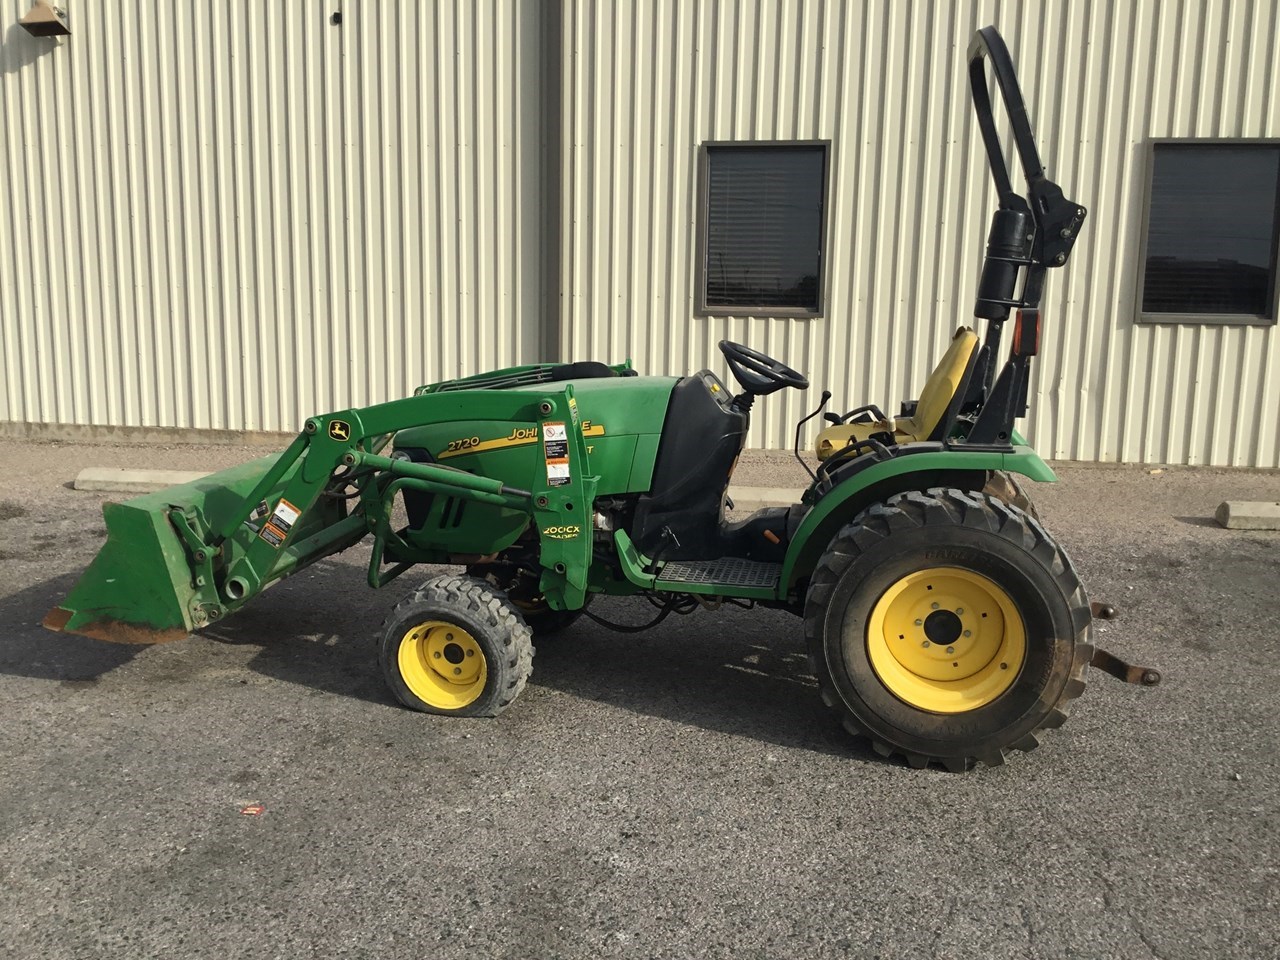 John Deere 2720 Cut Compact Utility Tractor For Sale In Durant Oklahoma 1207